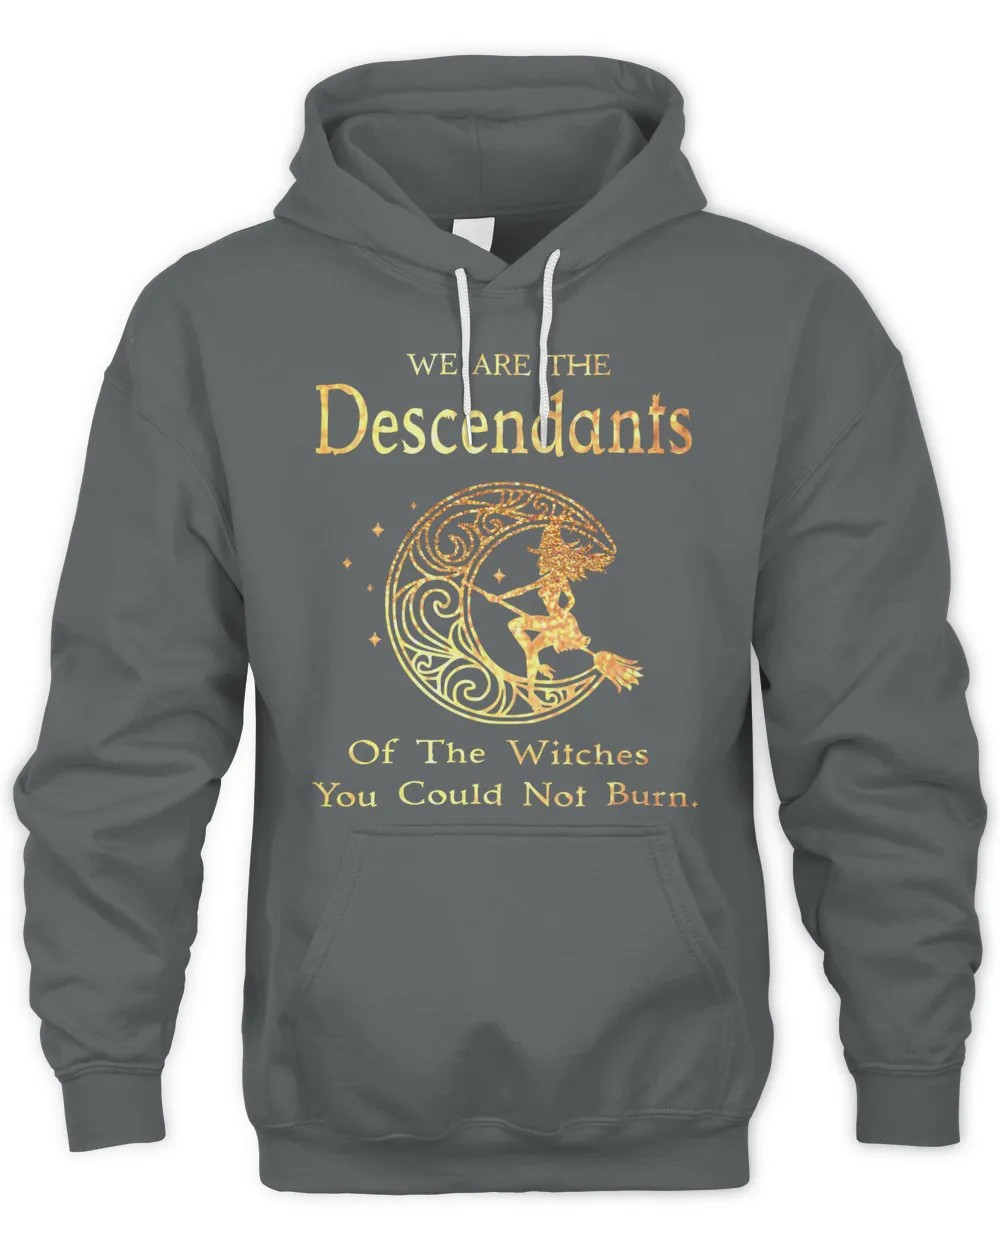 We are the Descendants  of the witches moon